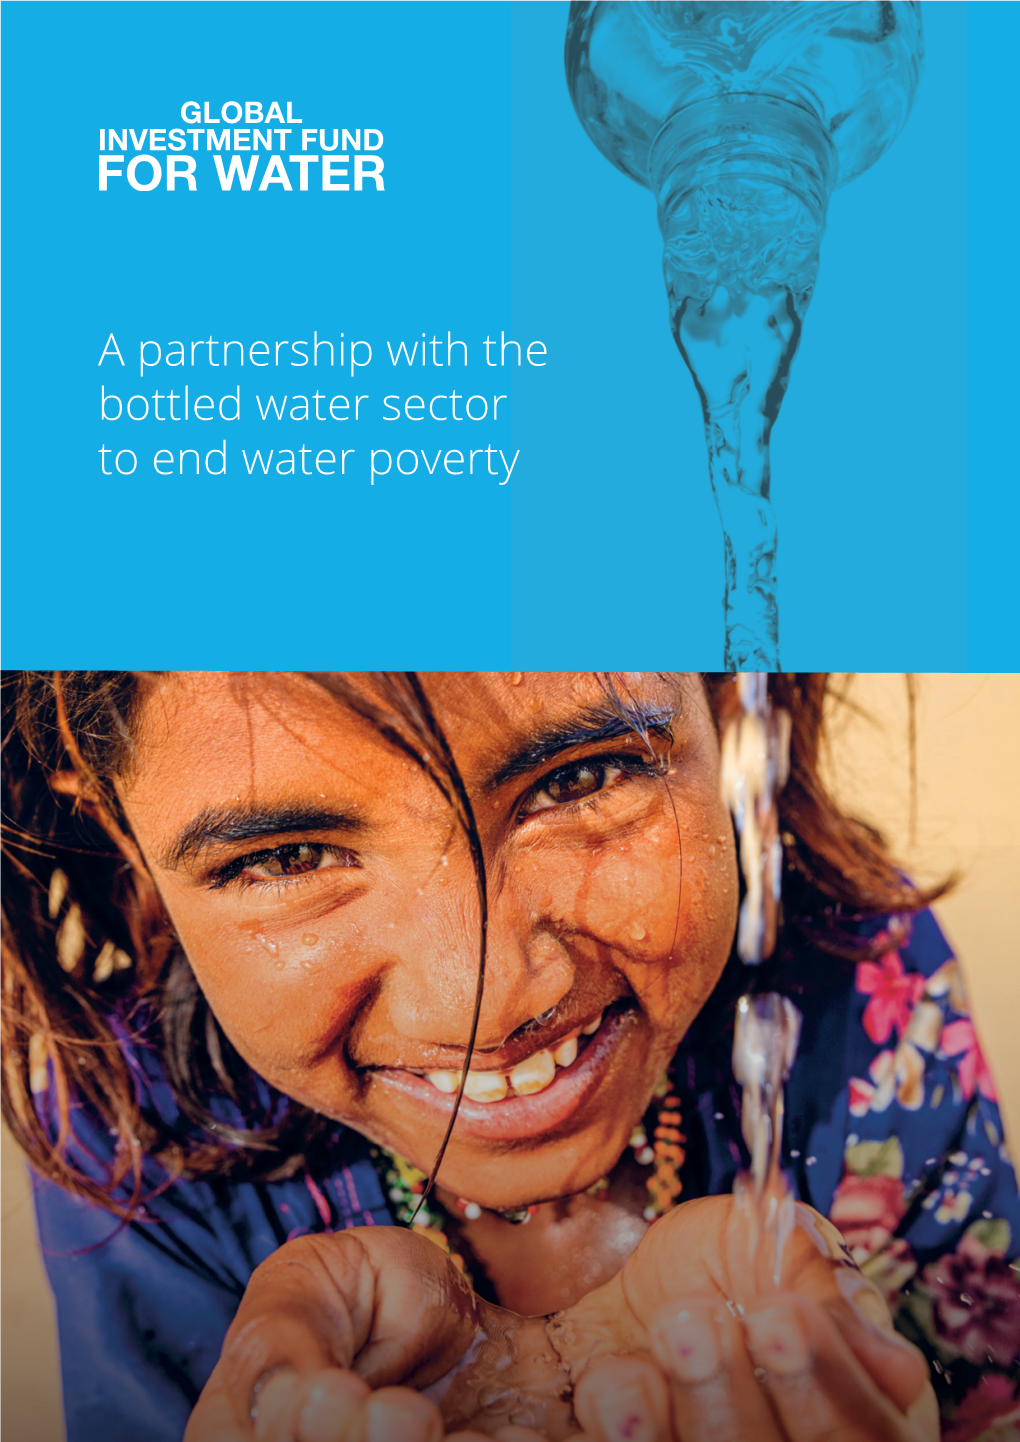 A Partnership with the Bottled Water Sector to End Water Poverty Photo Credit: Oxfam